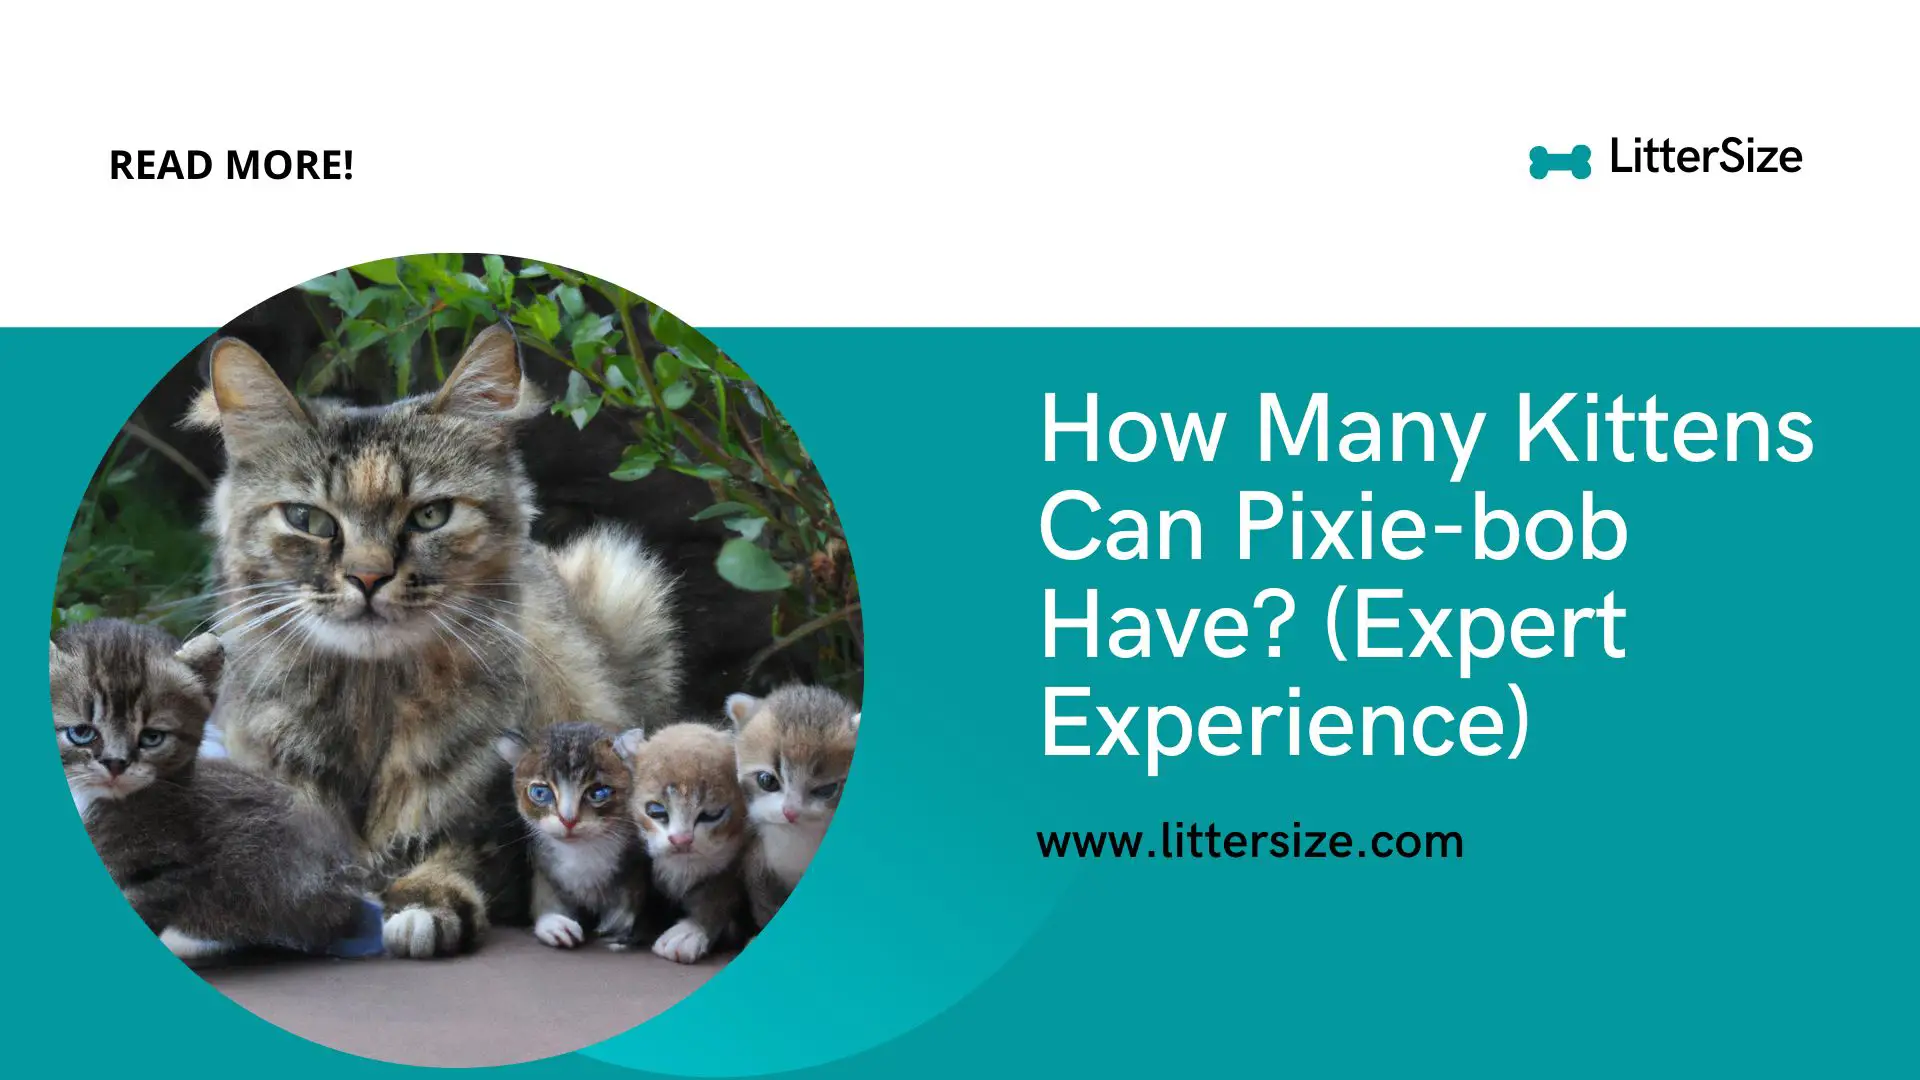 How Many Kittens Can Pixie-bob Have? (Expert Experience)